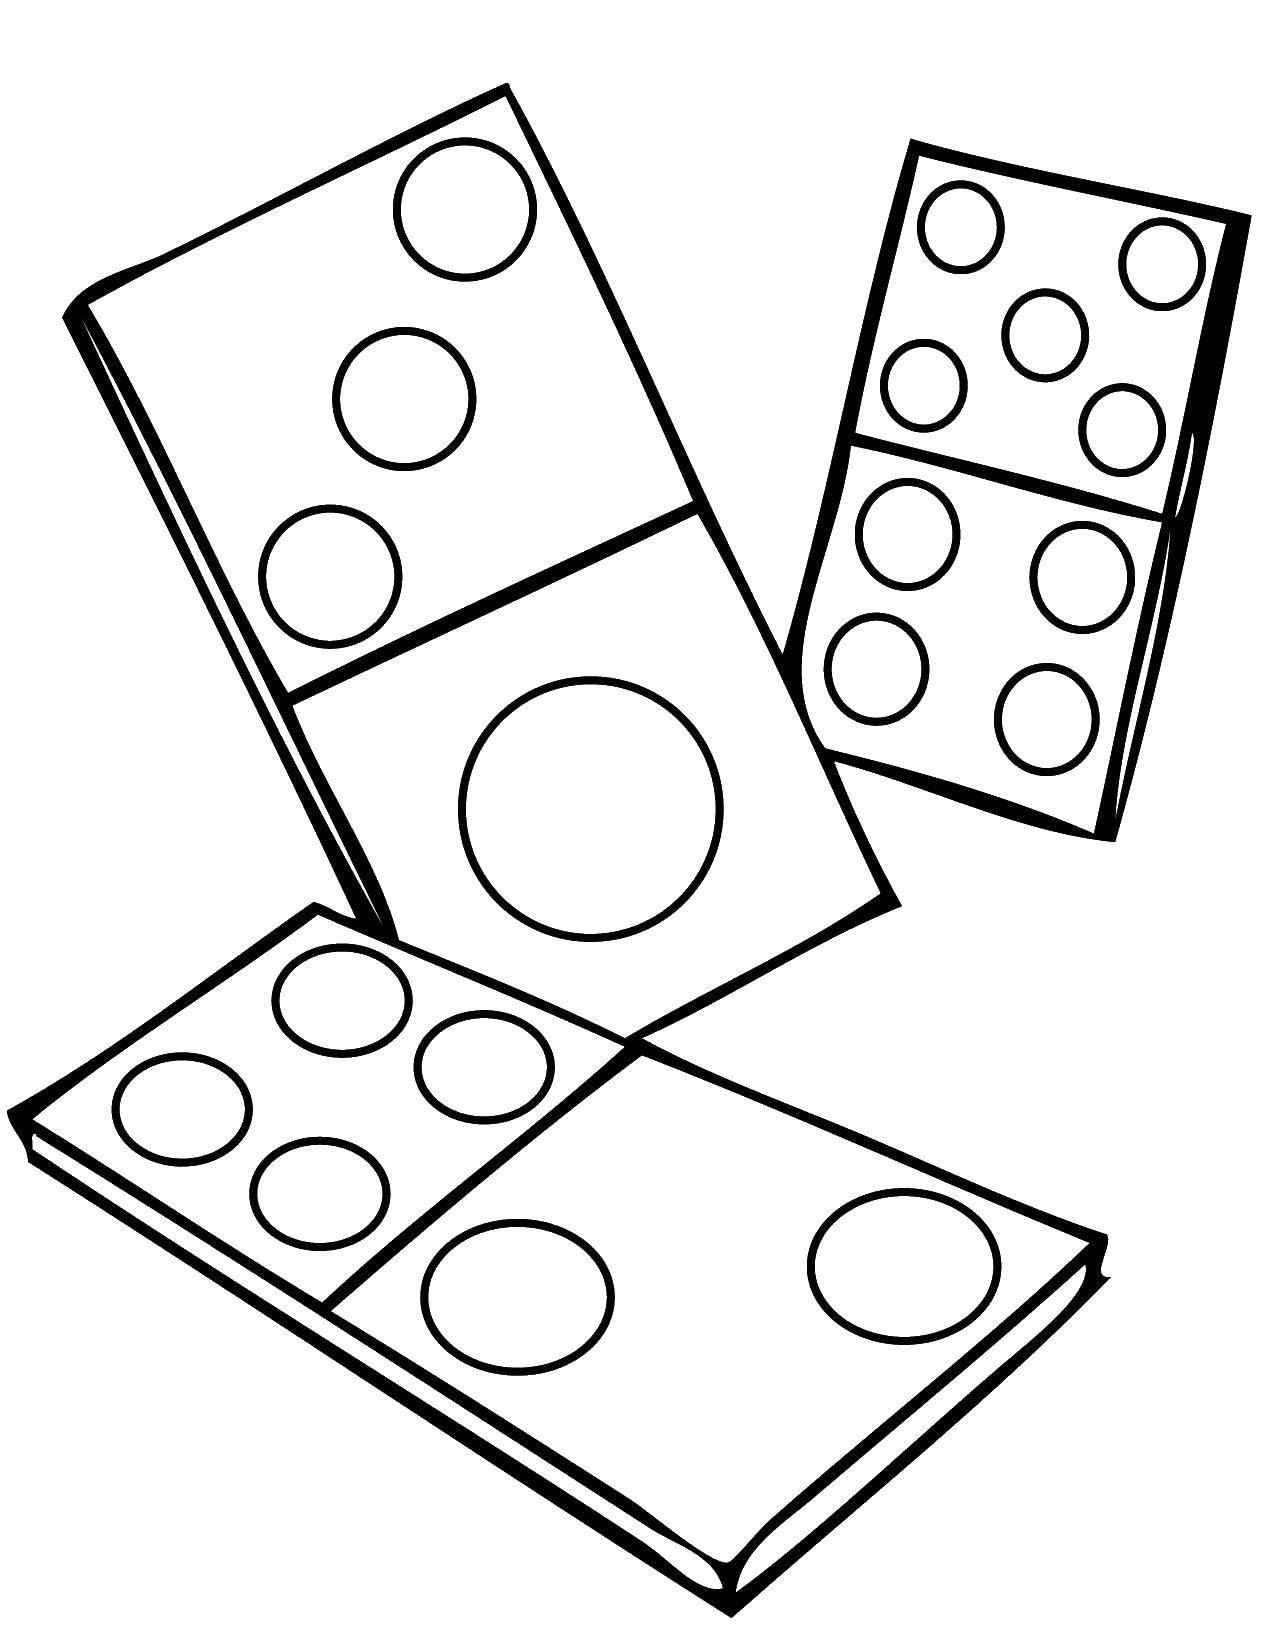 Online coloring pages coloring page domino game download print coloring page